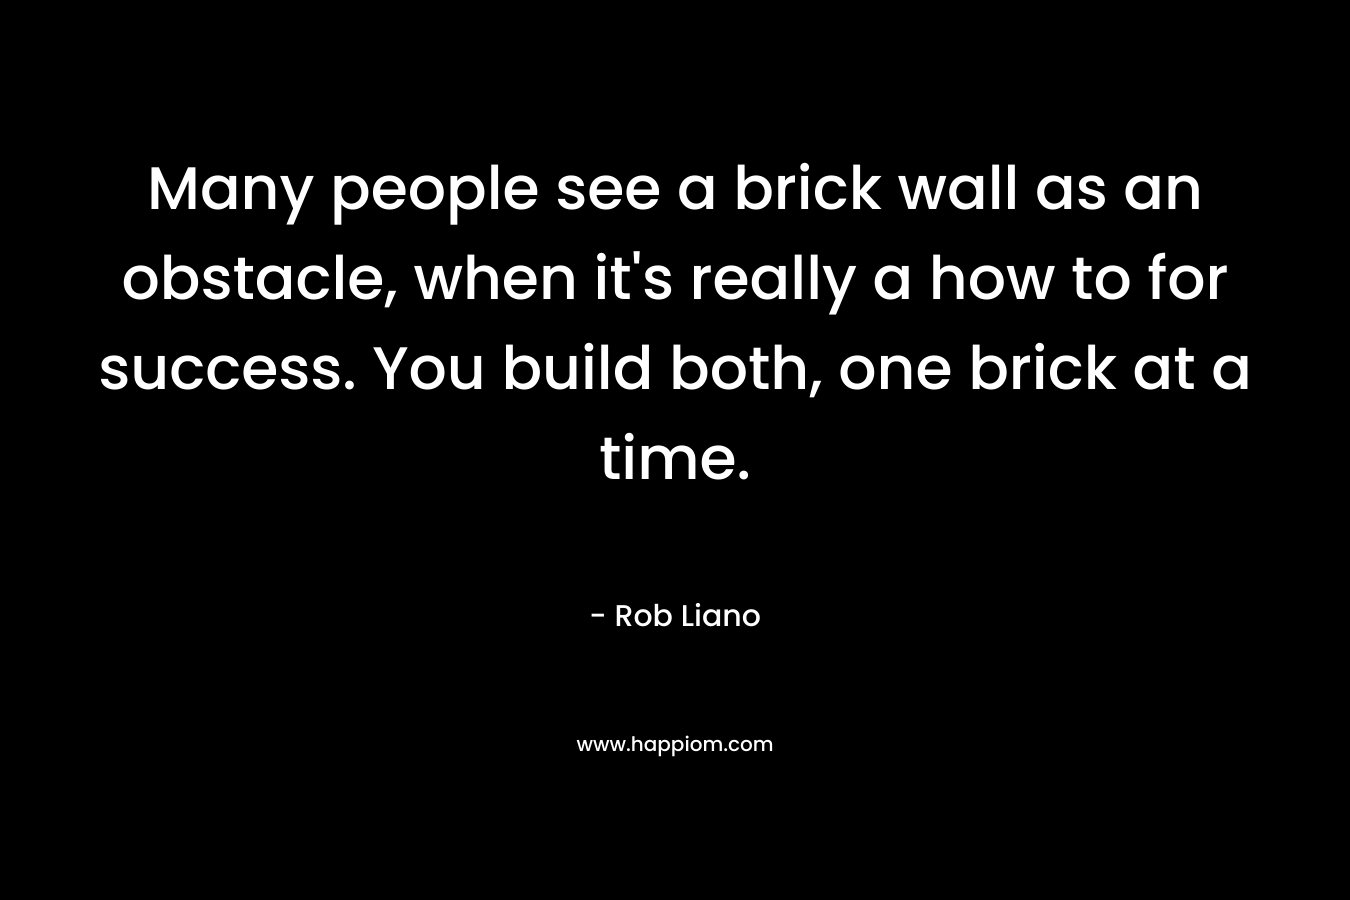 Many people see a brick wall as an obstacle, when it’s really a how to for success. You build both, one brick at a time. – Rob Liano